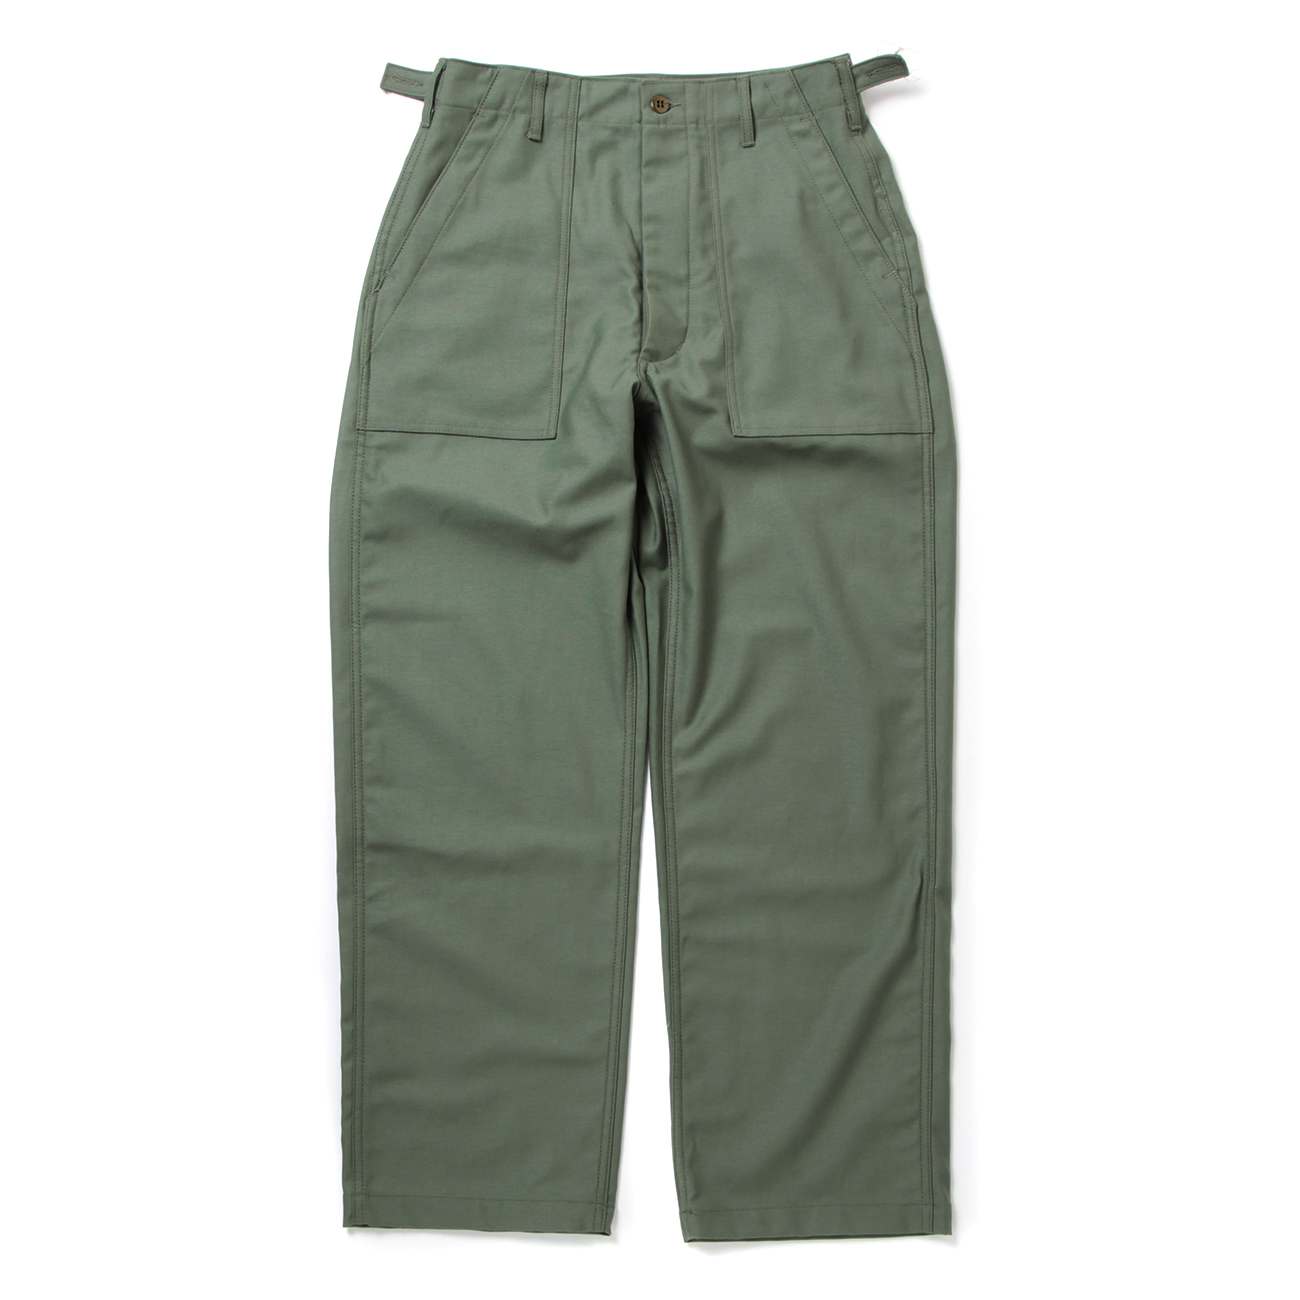 EG Workaday - Fatigue Pant - Cotton Reversed Sateen - Olive